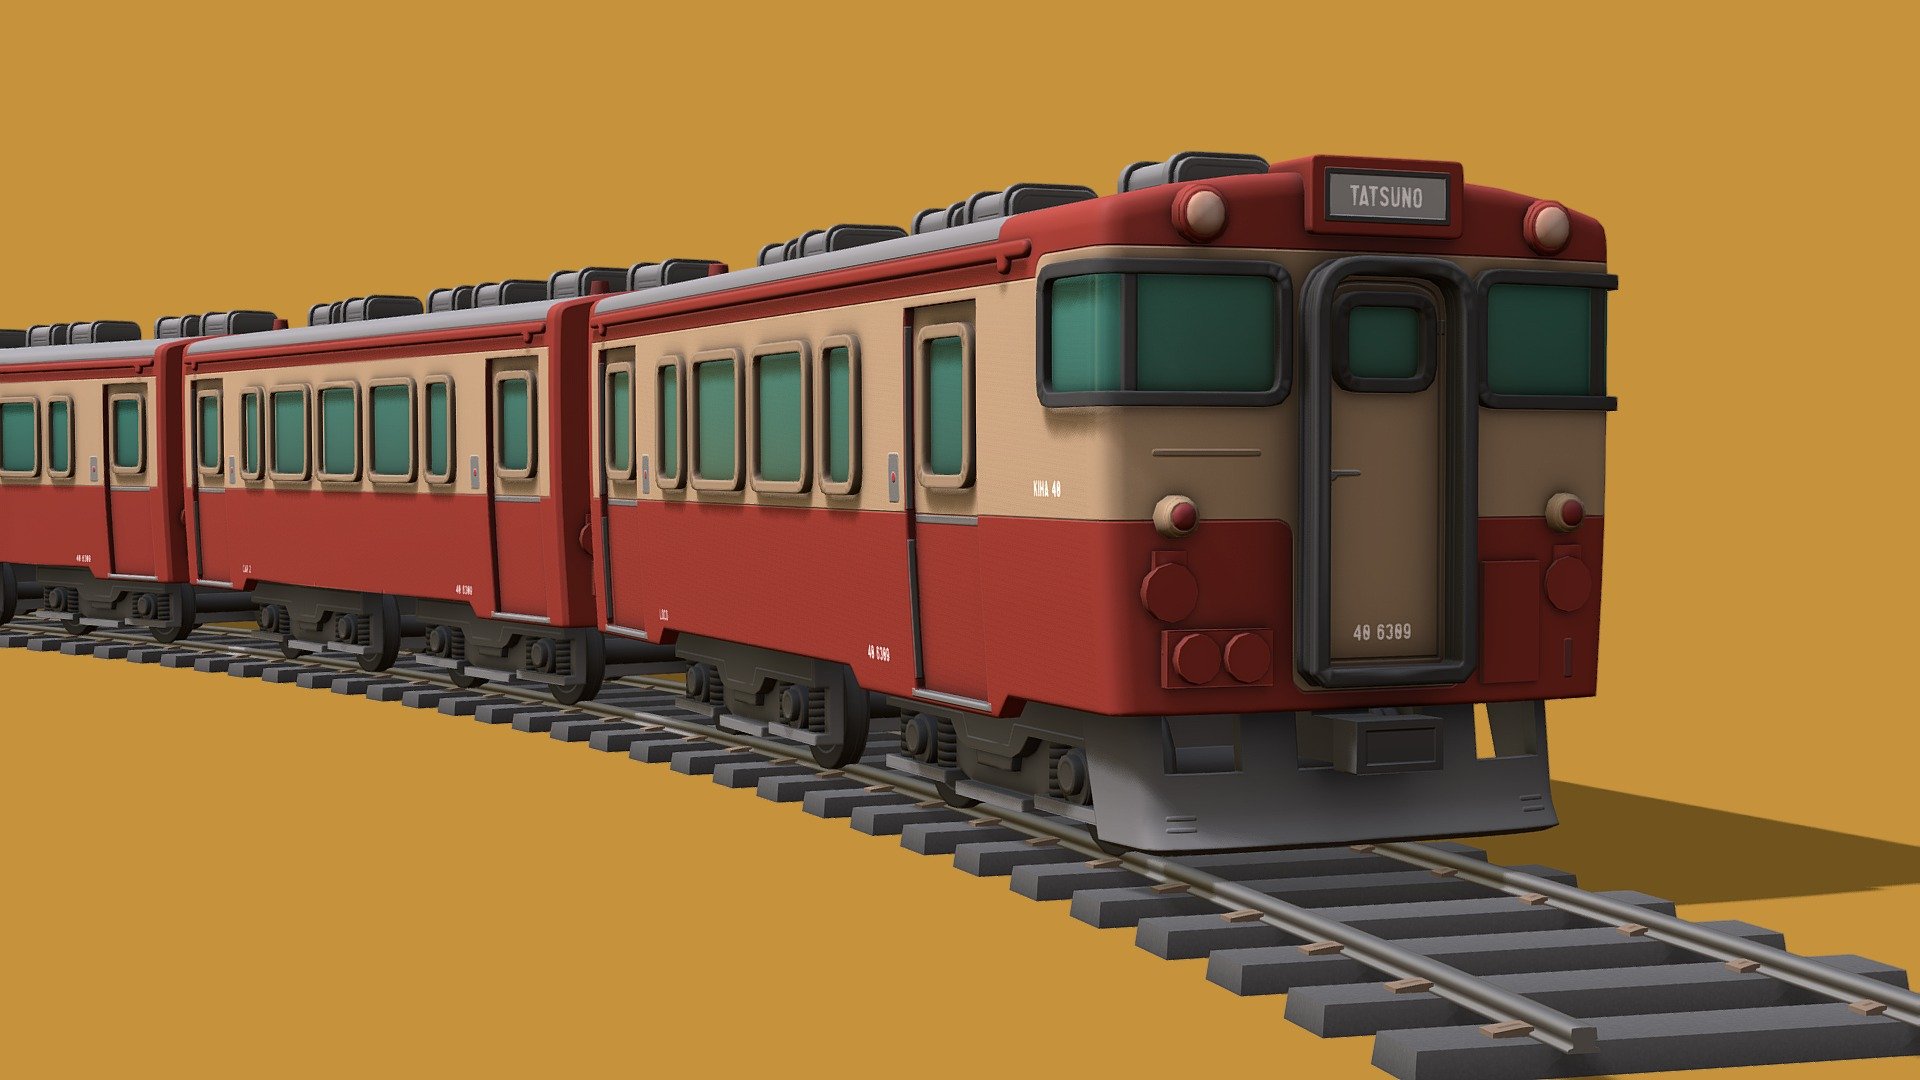 This train loosly based on the Japanese KiHa 40. Model inspired by the Bandai series of model trains called B Train Shorty.

Heres some reading about the famous commuter trains https://en.wikipedia.org/wiki/KiHa_40_series

Like me on instagram pls 🥺 https://www.instagram.com/p/CFHq0aUDno8/ - Cartoon Commuter Train - Buy Royalty Free 3D model by Daniel Chandler (@DanielChandler) 3d model